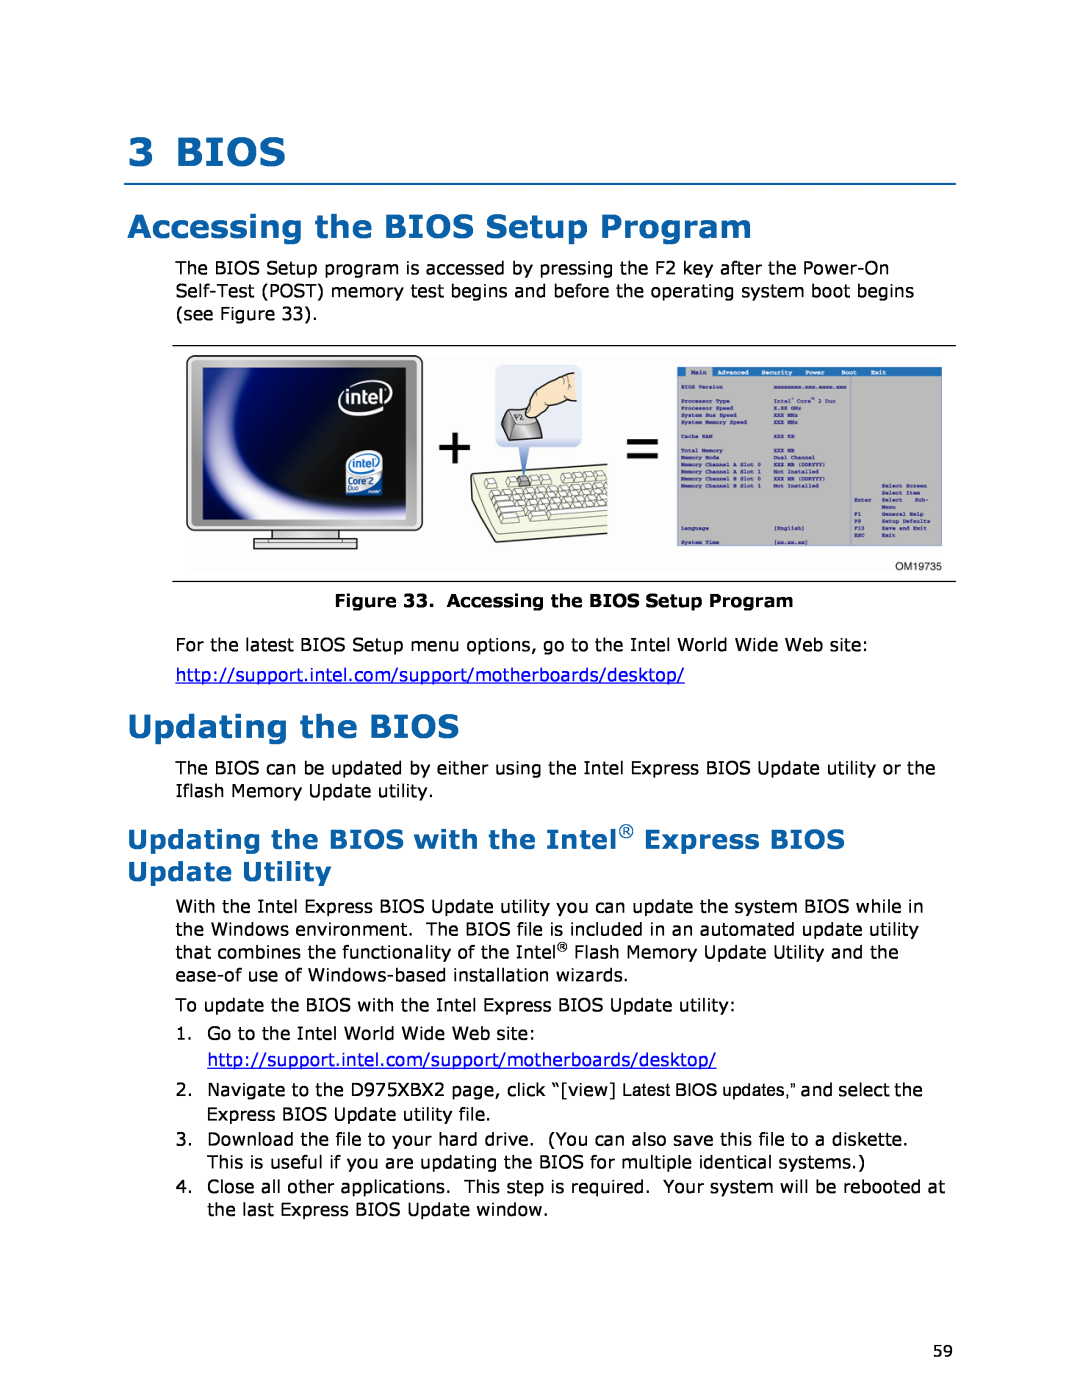 Intel D975XBX2 Bios, Accessing the BIOS Setup Program, Updating the BIOS with the Intel Express BIOS, Update Utility 